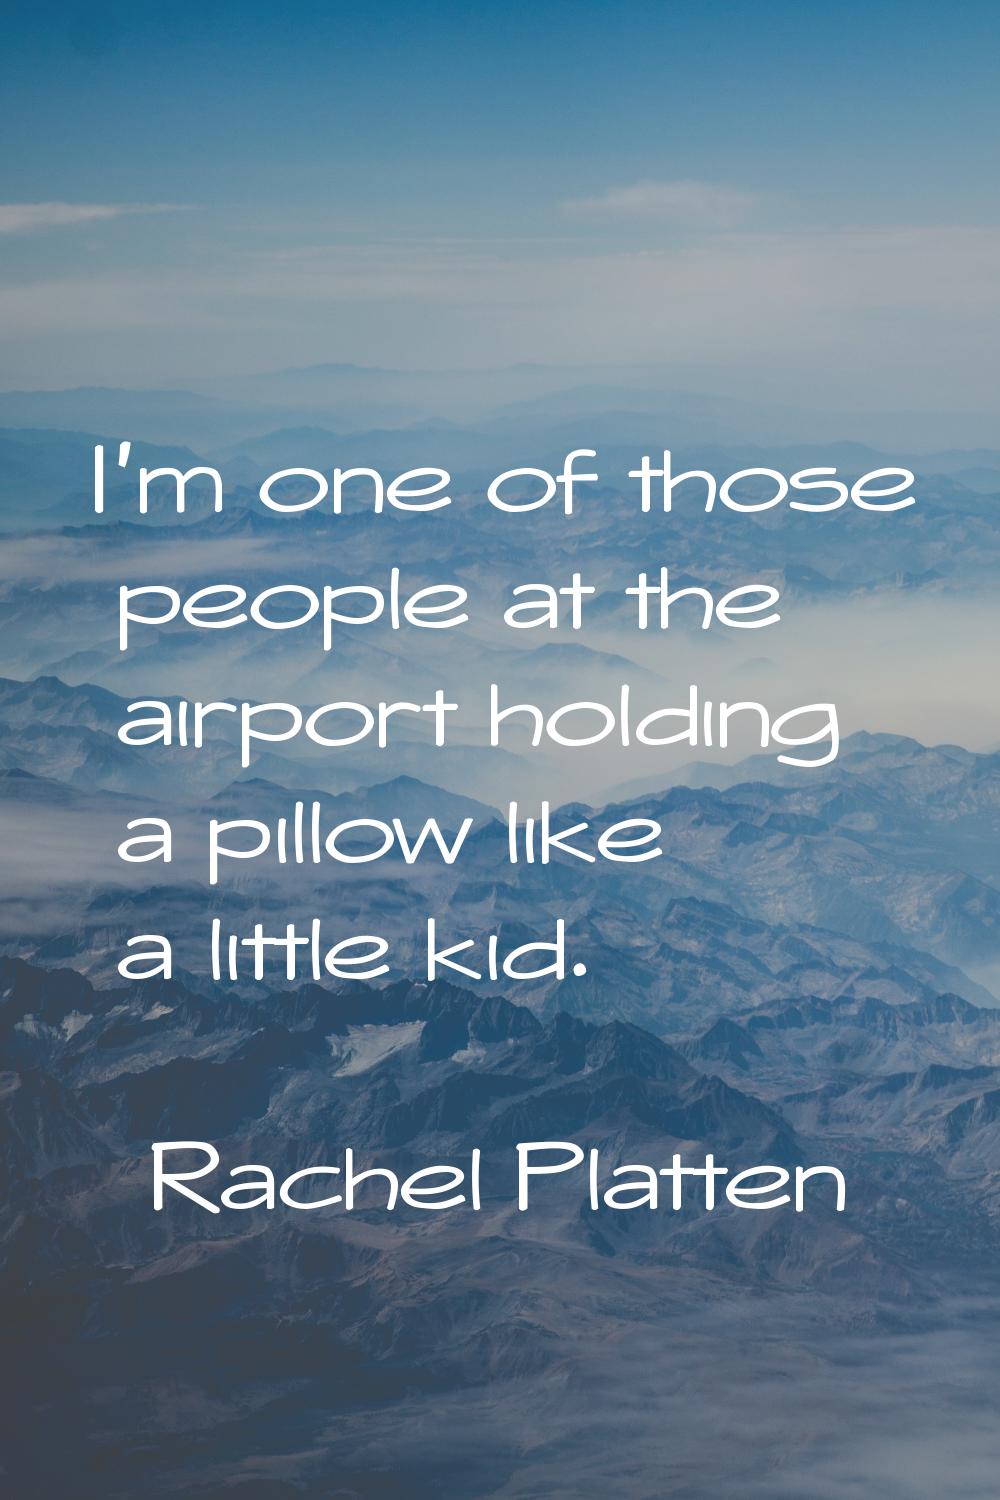 I'm one of those people at the airport holding a pillow like a little kid.